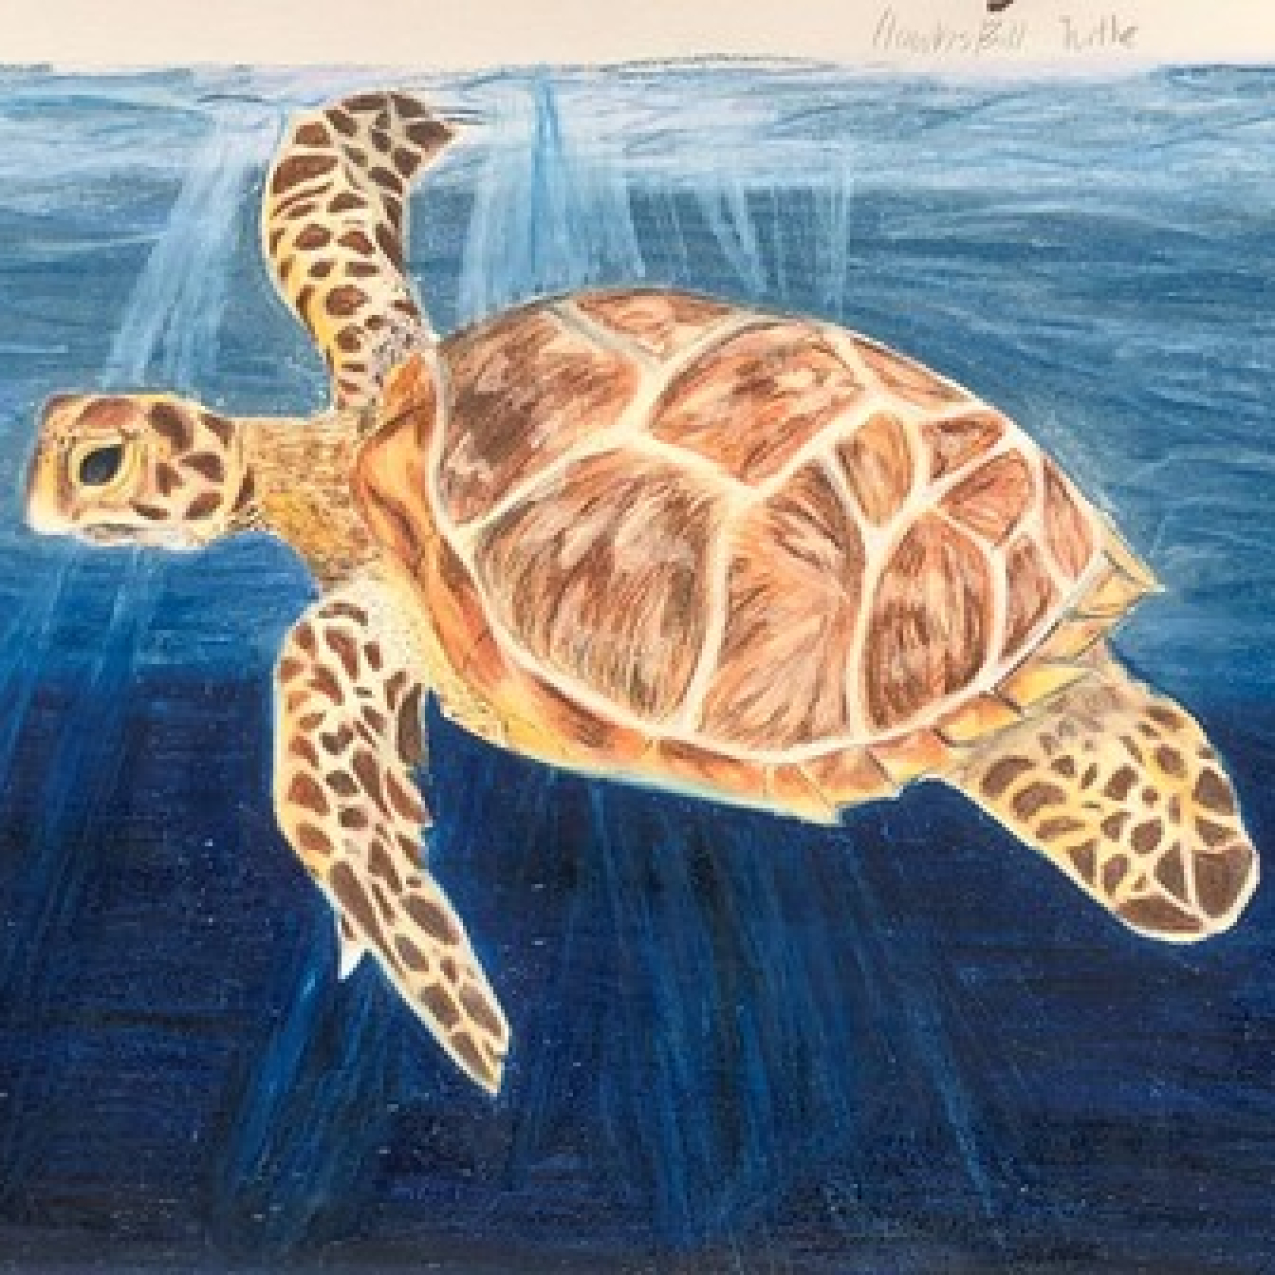 A student’s illustration of a hawksbill turtle swimming through ocean water that fades from light to dark blue with shafts of light shining through.